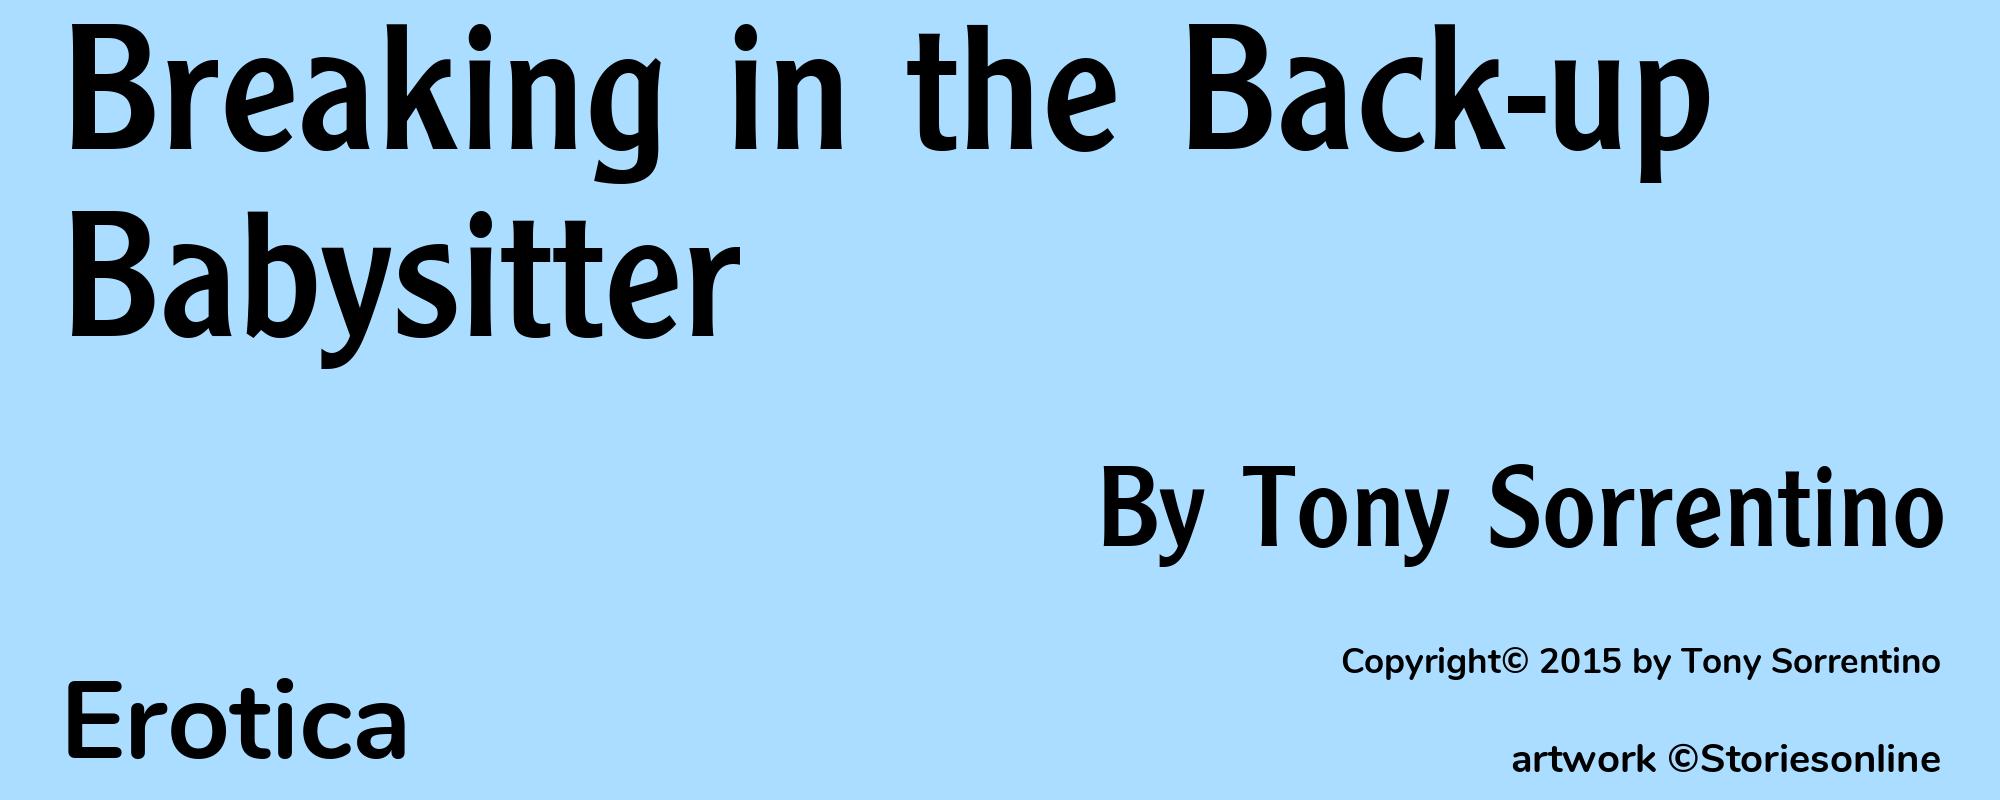 Breaking in the Back-up Babysitter - Cover